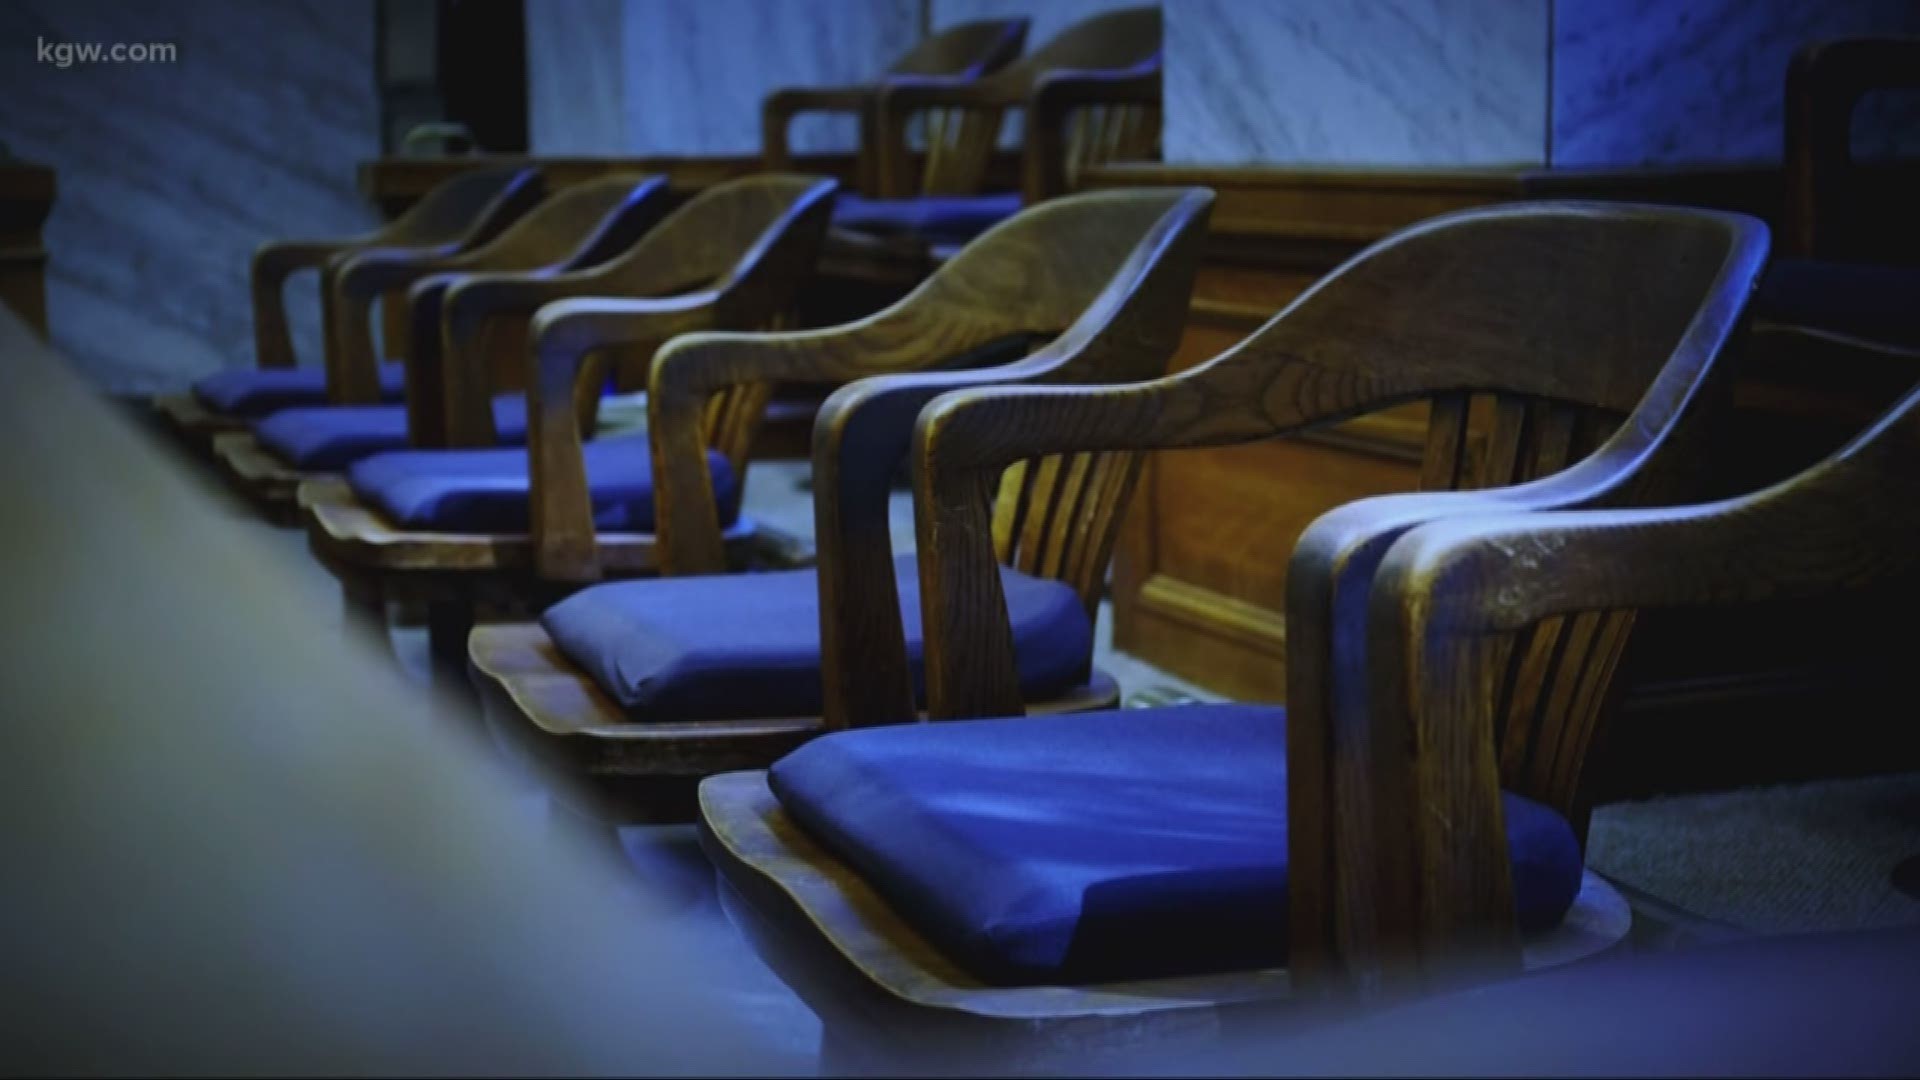 The US Supreme Court made a monumental decision that will impact every courtroom in the state of Oregon by banning non-unanimous jury verdicts.